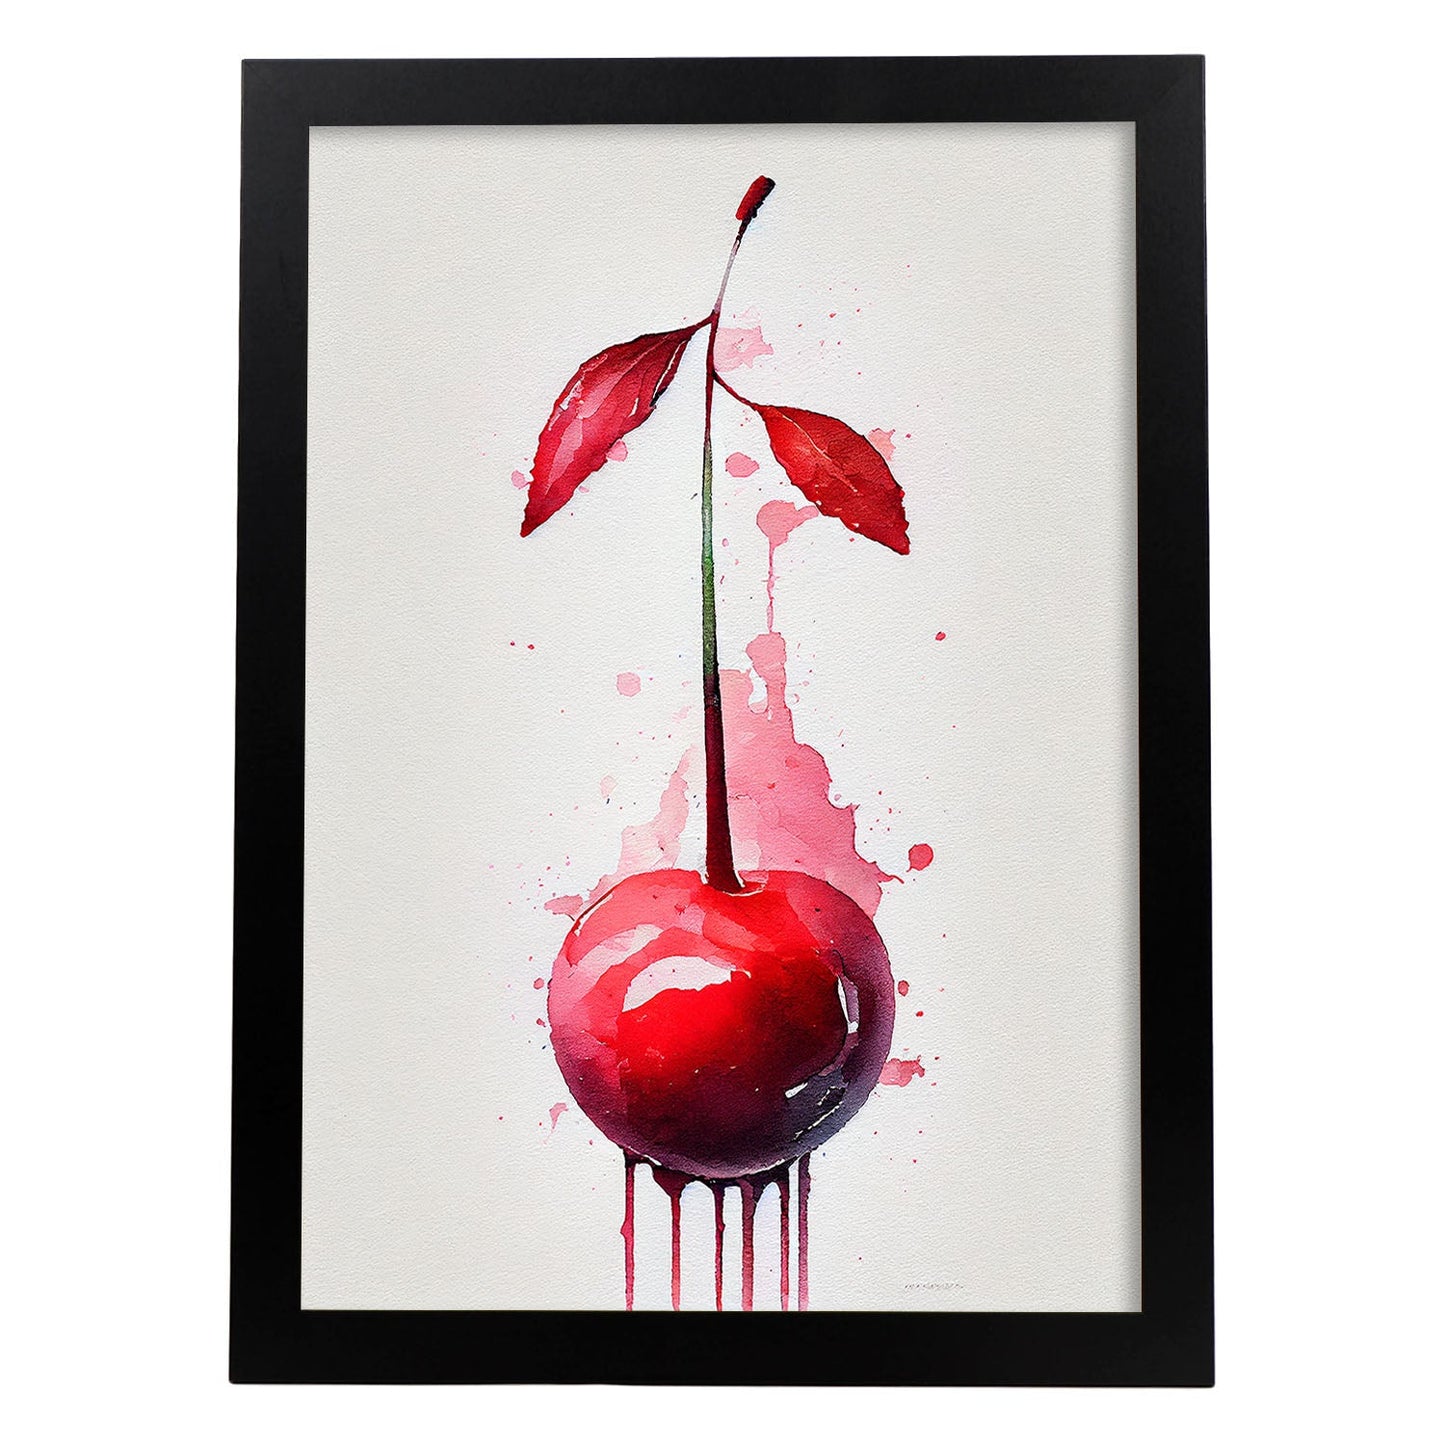 Nacnic minimalist Cherry_1. Aesthetic Wall Art Prints for Bedroom or Living Room Design.